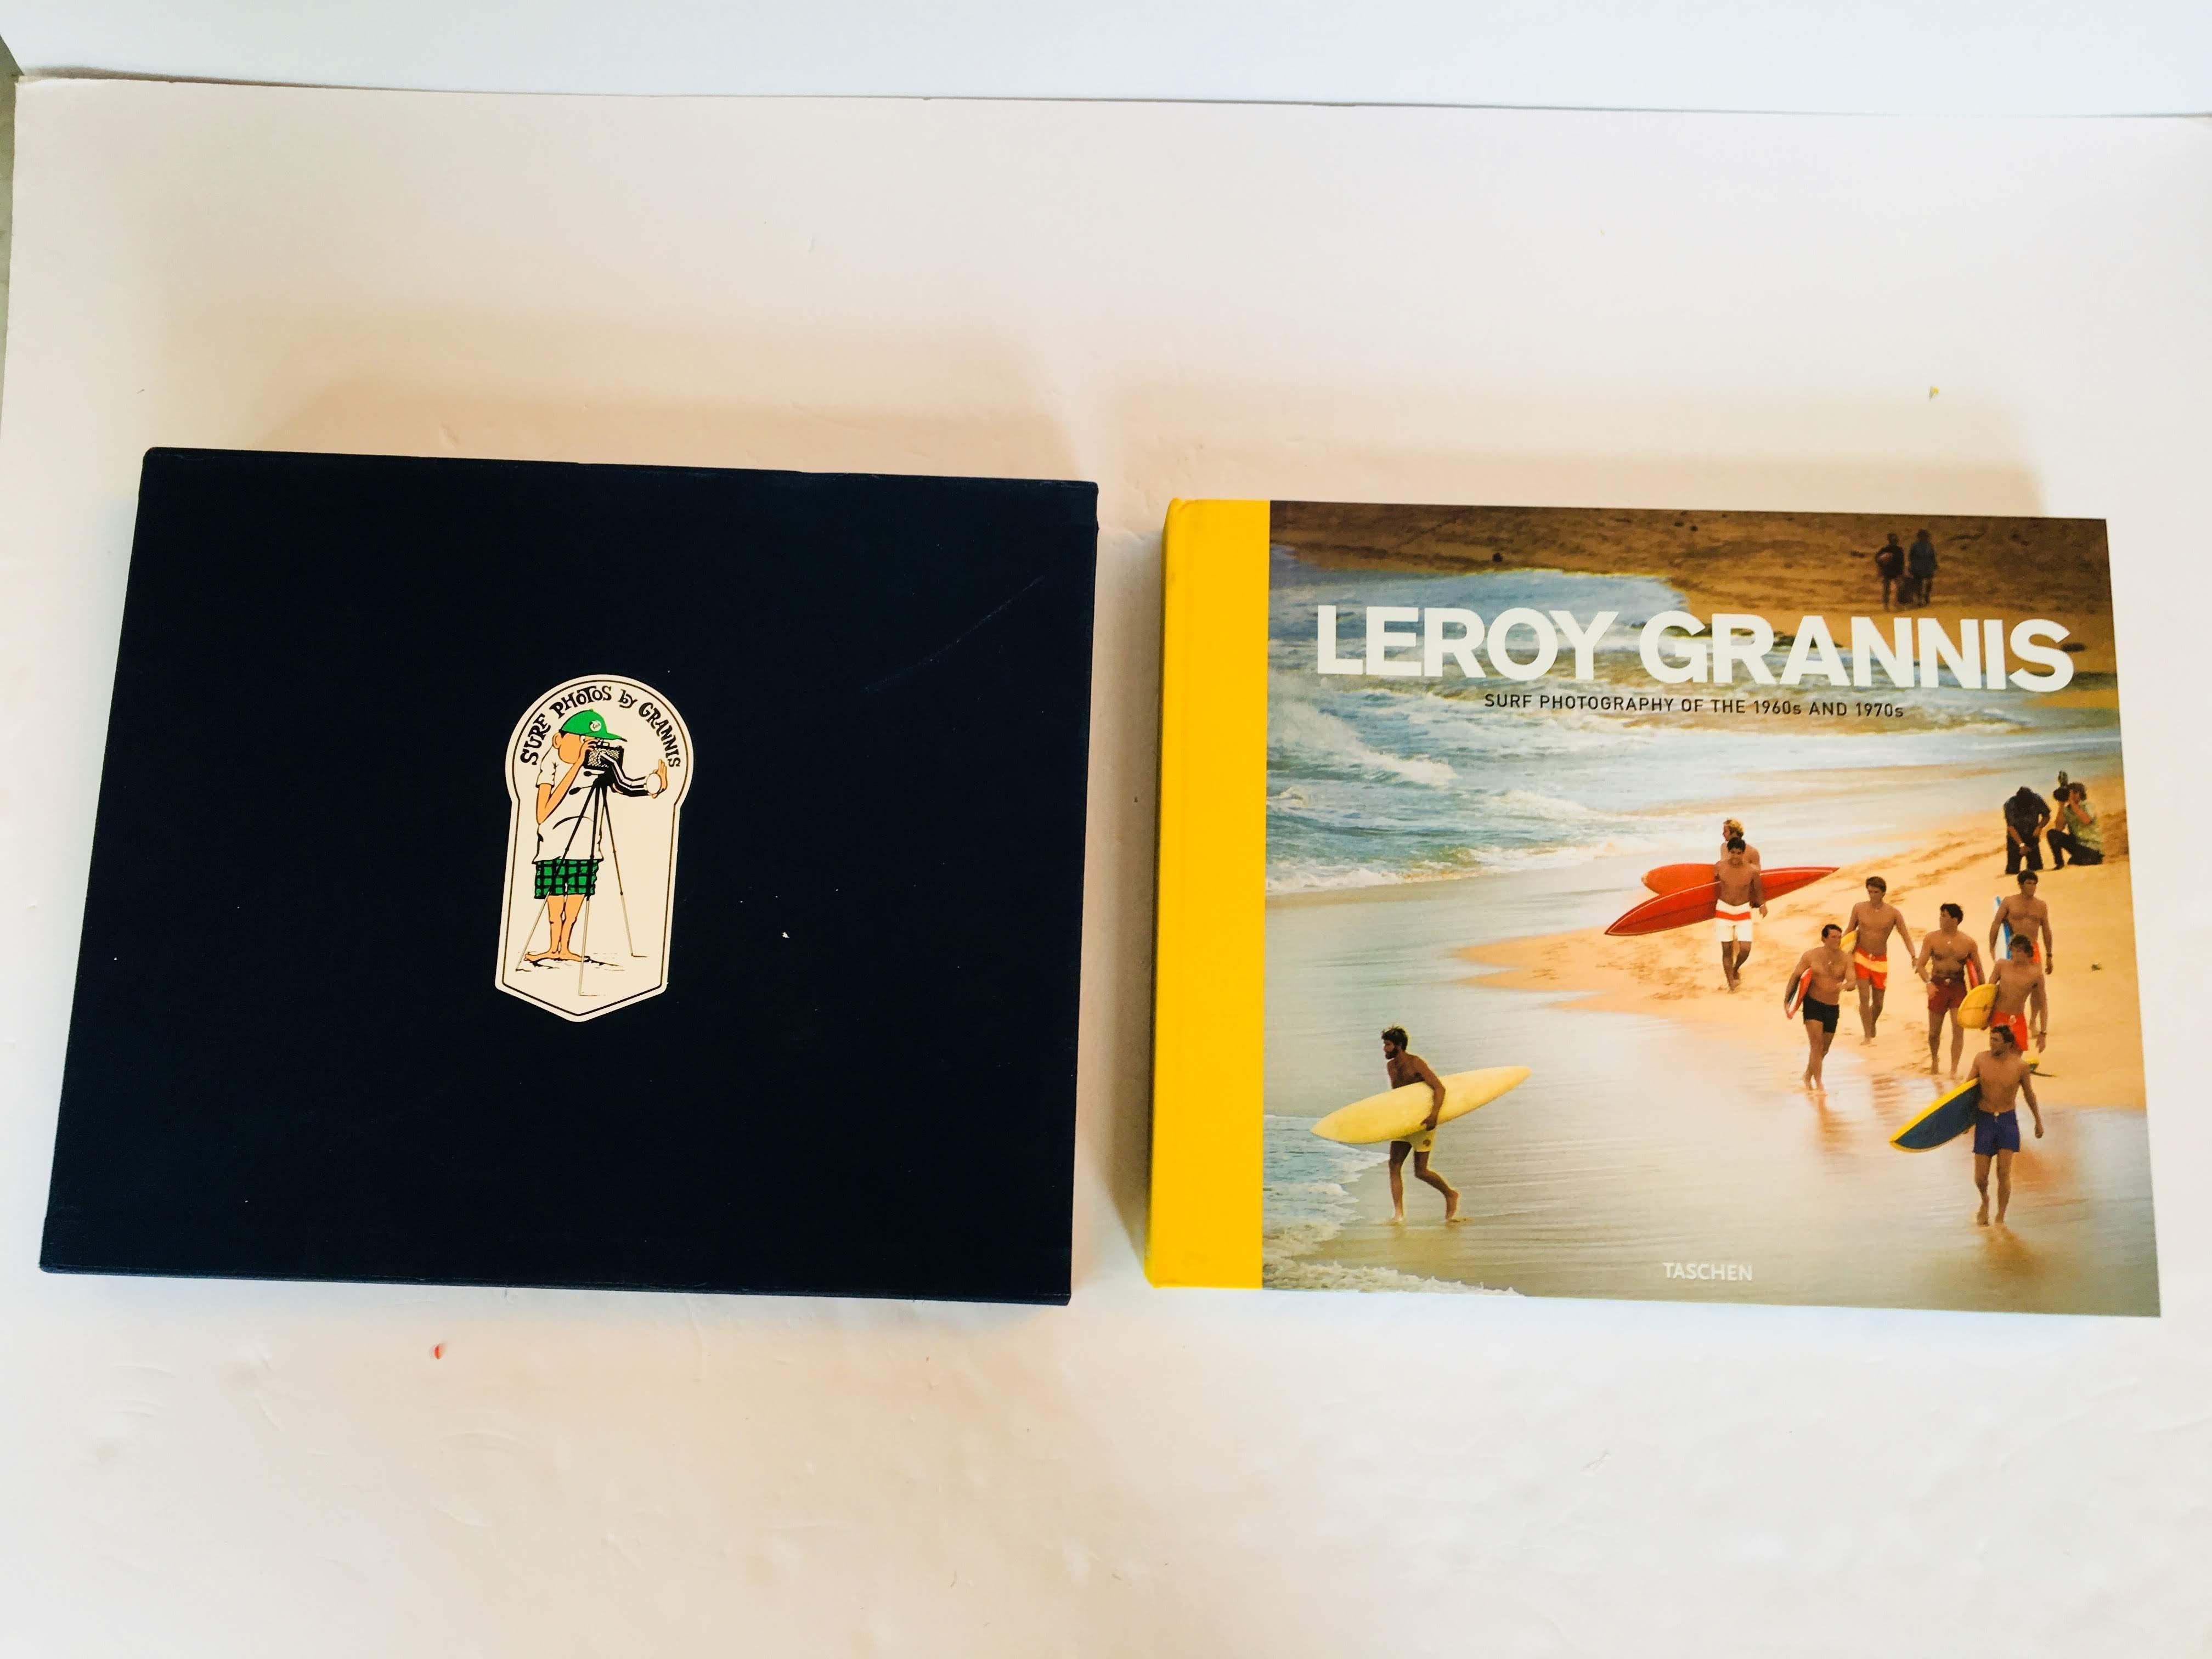 Join us on a surfin’ safari through the sun-kissed golden years of surfing in this collection of photographs from the Hawaiian and Californian coastlines. Photographer LeRoy Grannis got right in the midst of the action with his primitive on-board